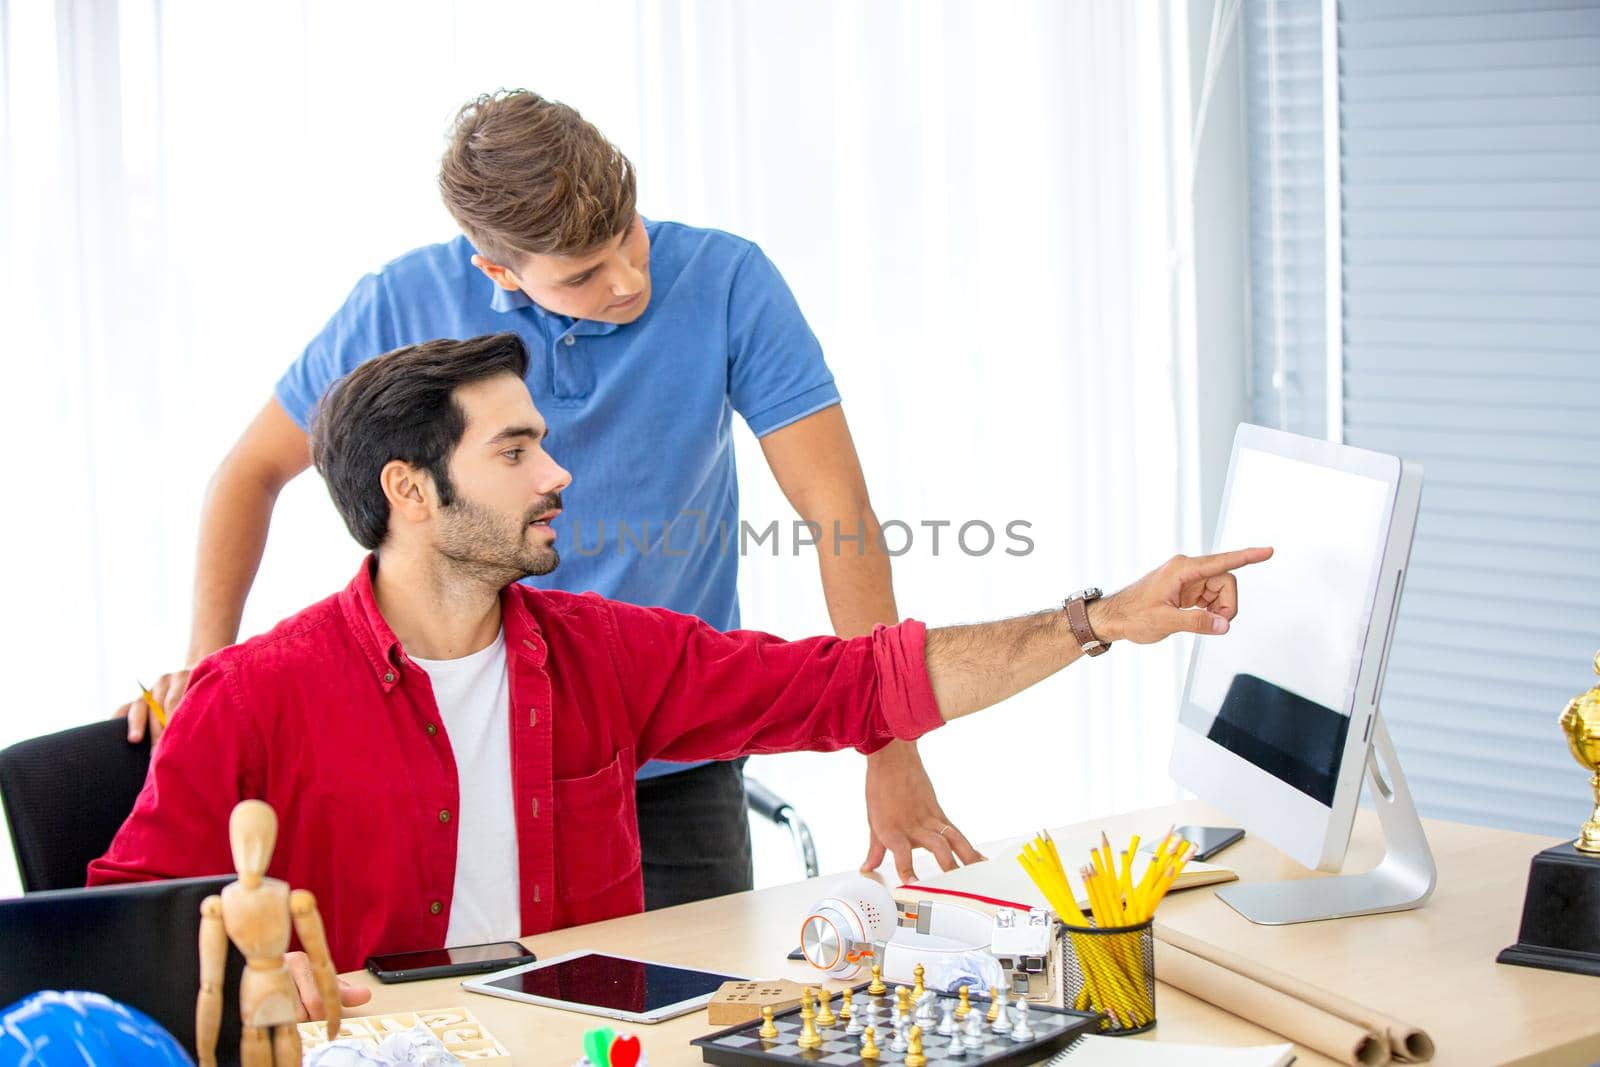 Business people working in office on desktop computer, Group of happy business people in smart casual wear looking at the laptop and gesturing. Achieving success.